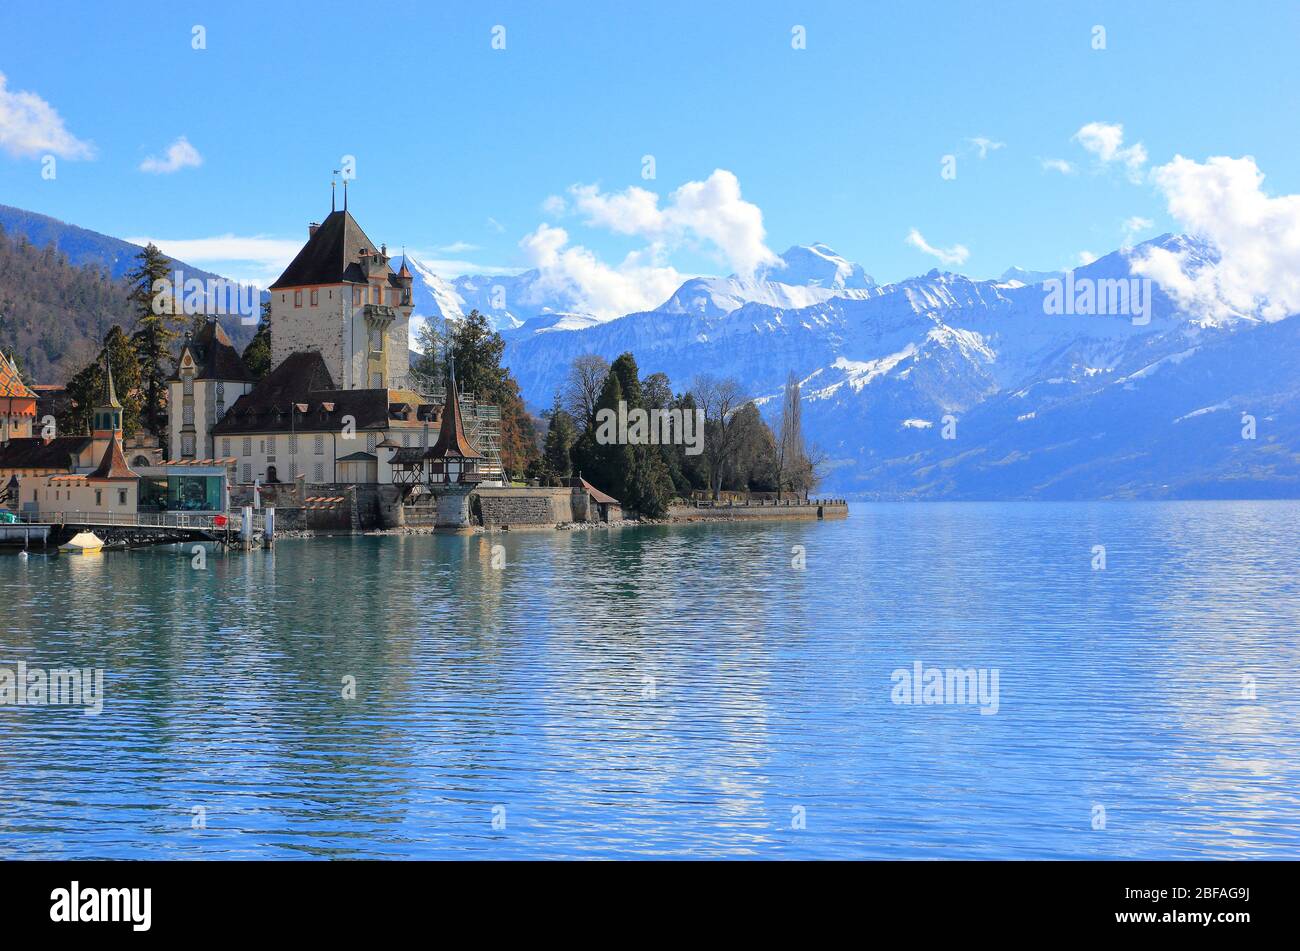 Oberhofen Castle from Lake Thun. Oberhofen town is located on the northern shore of Lake Thun. Switzerland, Europe. Stock Photo